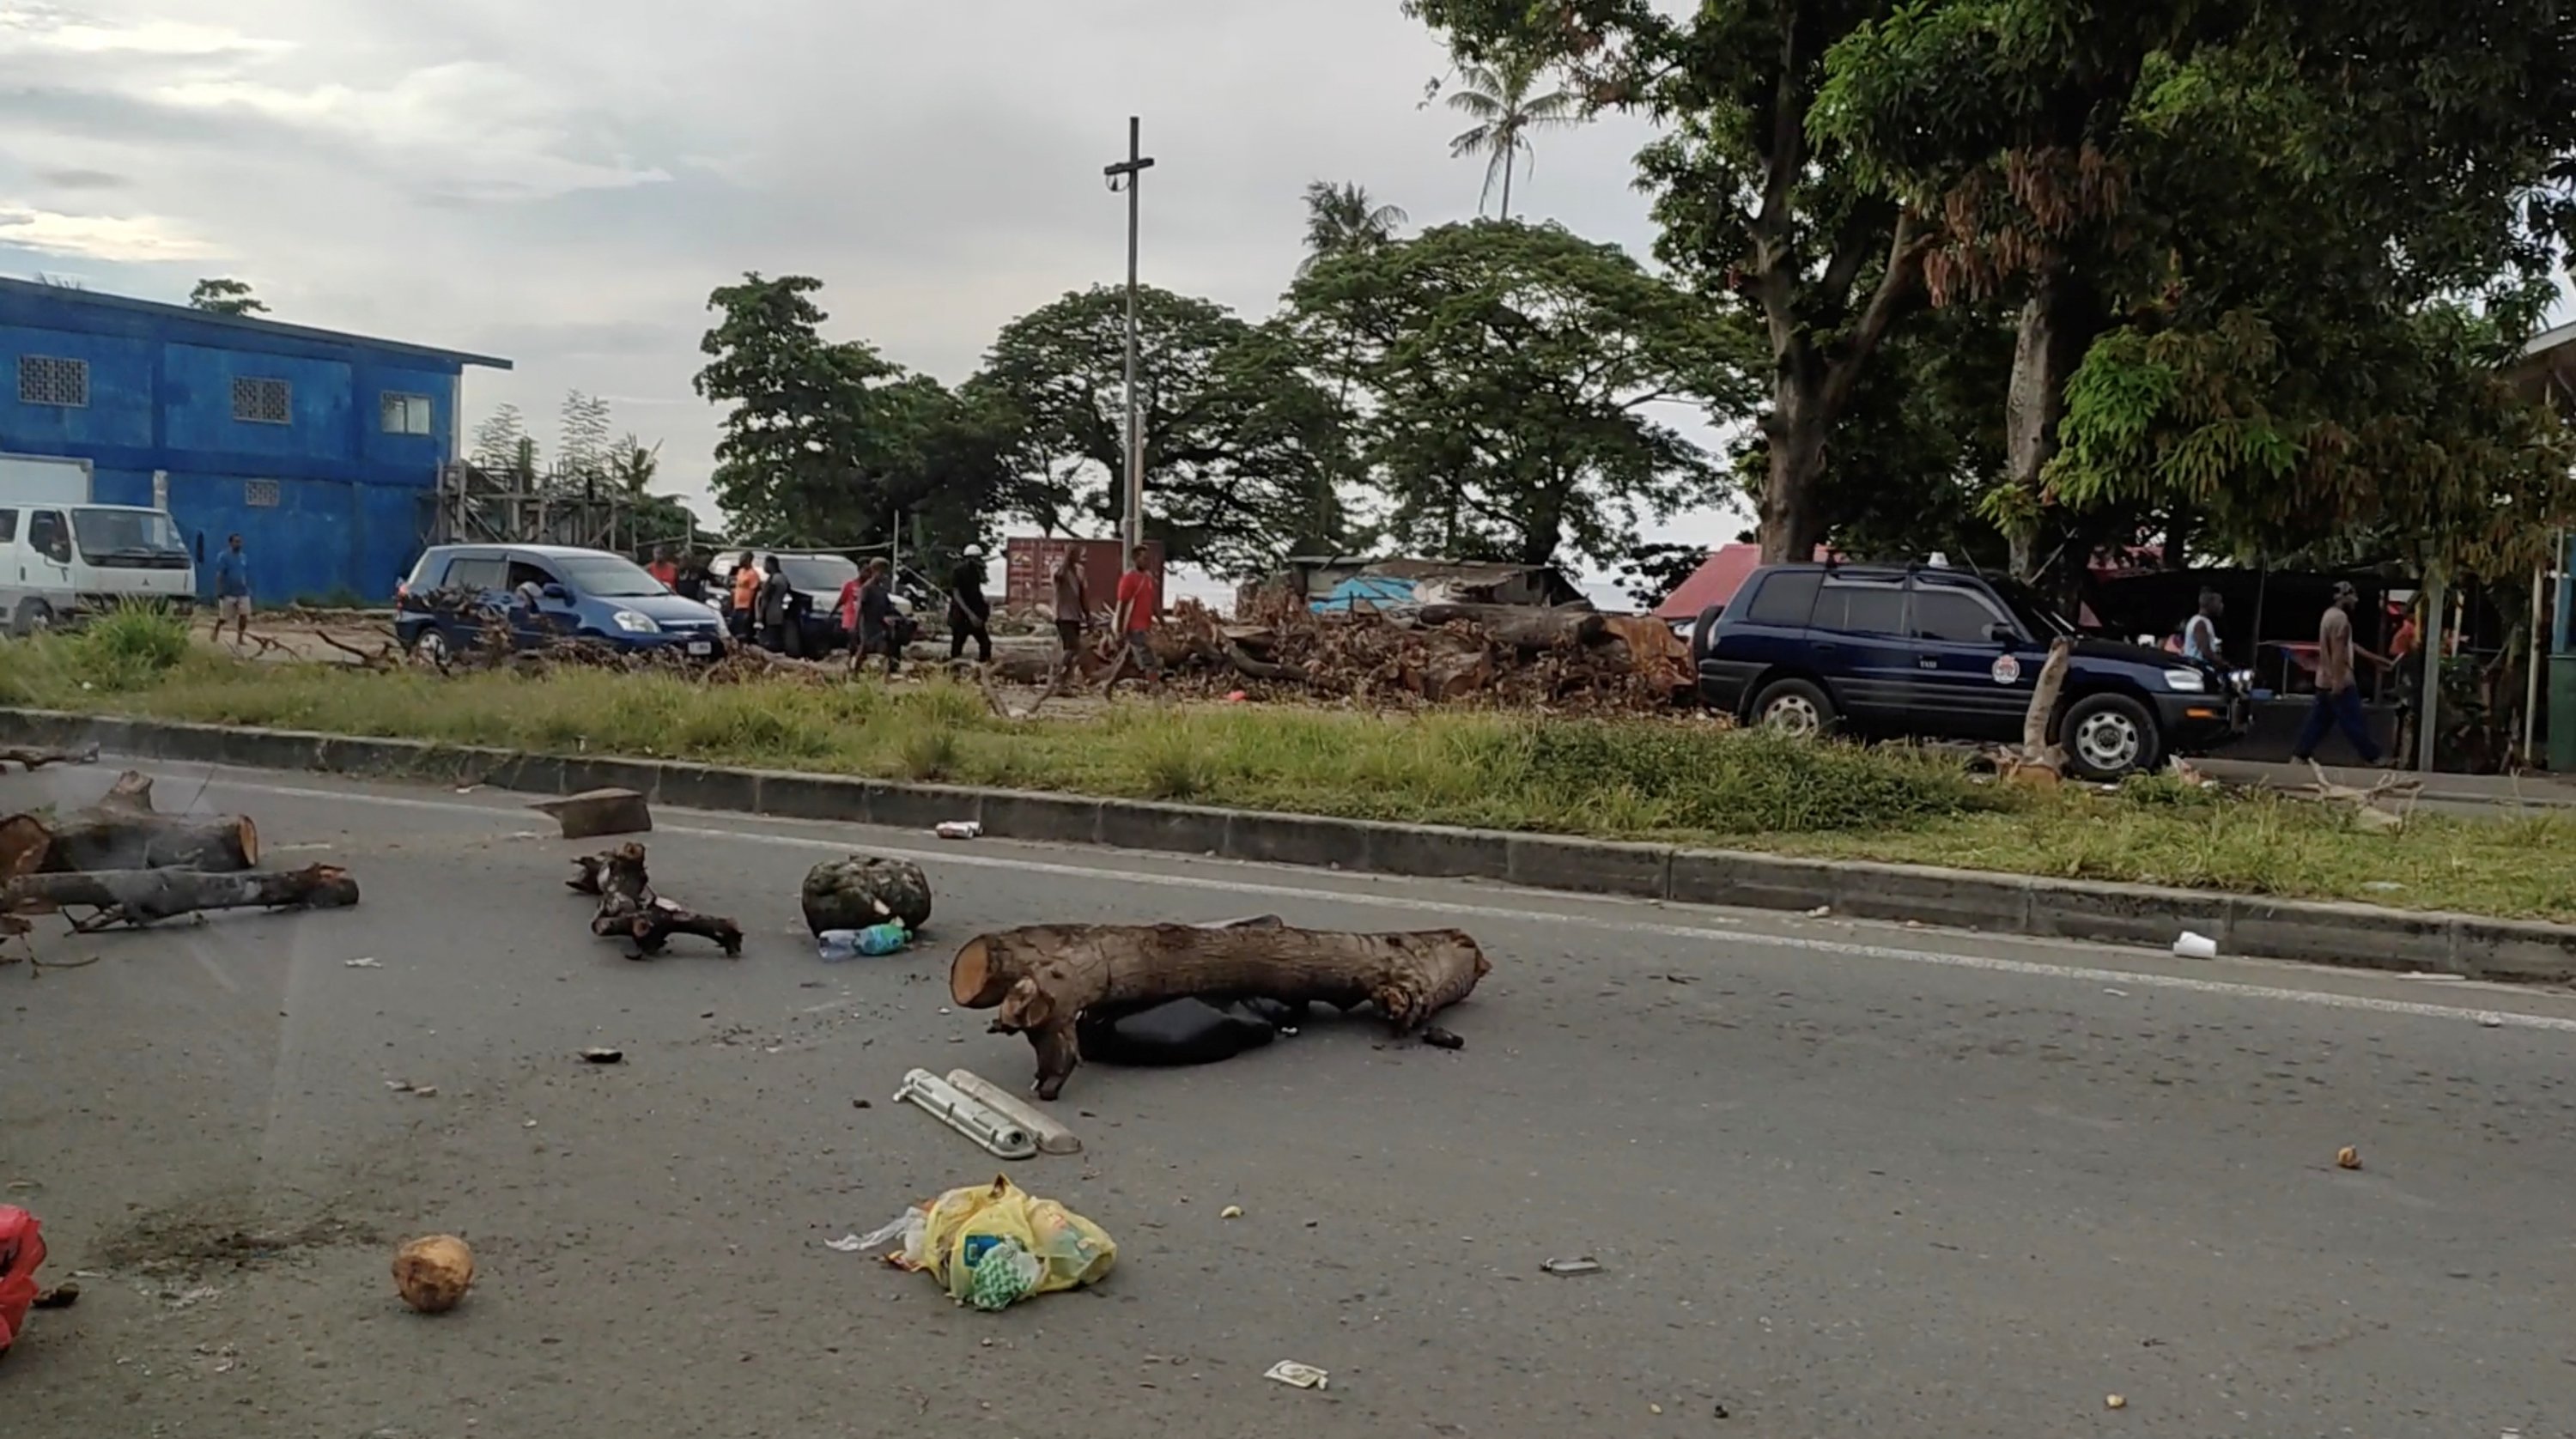 In this screen grab obtained by Reuters from a social media video, debris is seen on a highway, after protests against the government in Honiara, Solomon Islands, Nov. 24, 2021. (Georgina Kekea via Reuters)